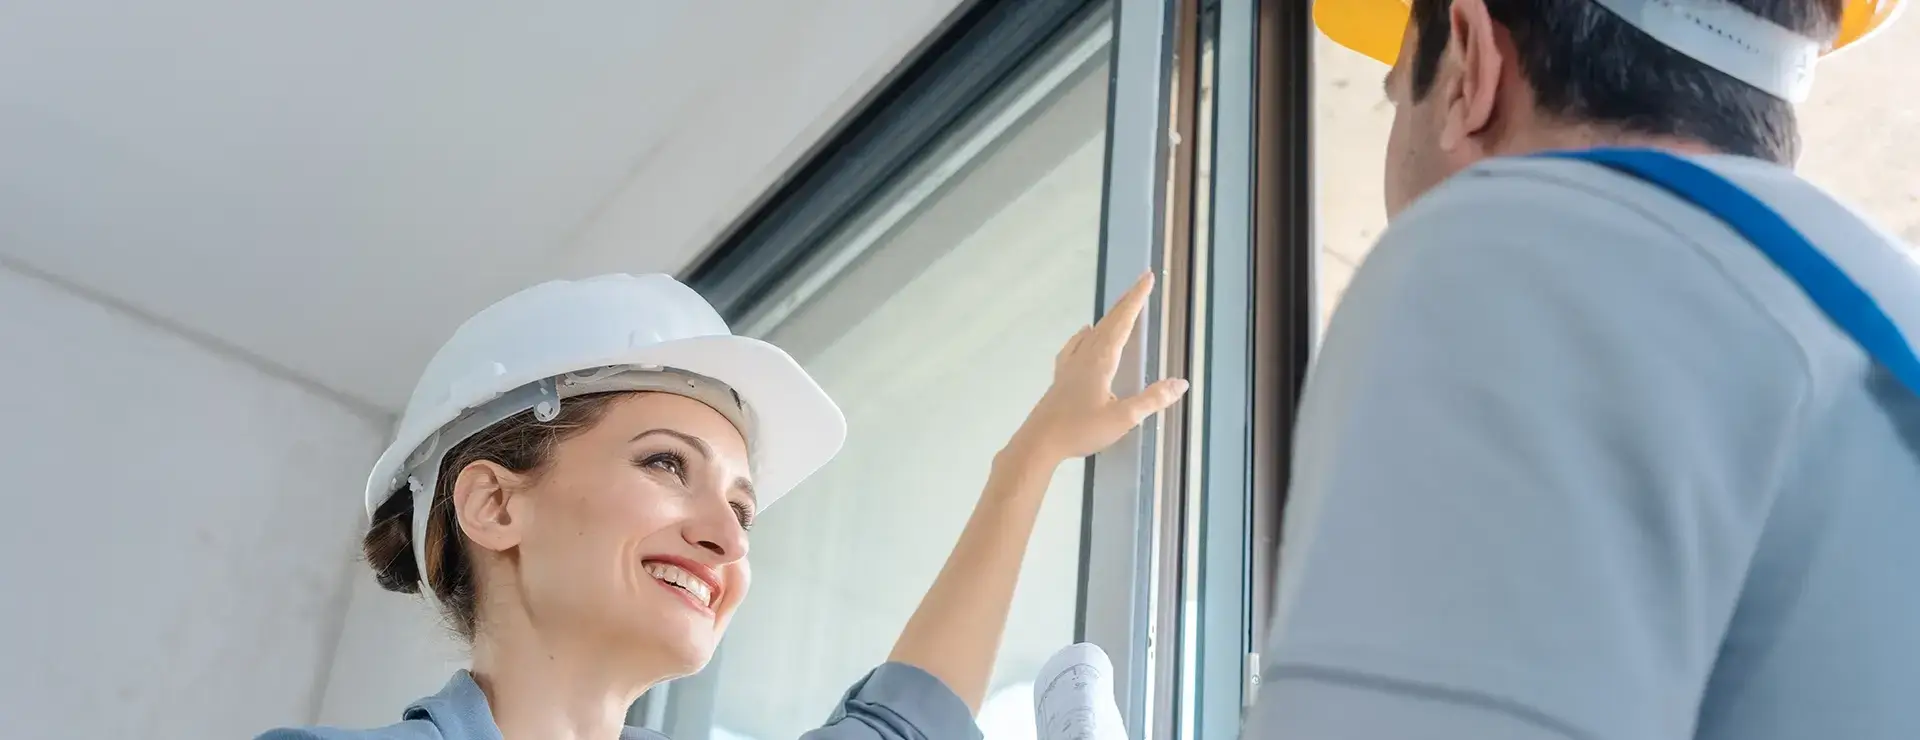 How do you measure window openings in the building accurately?